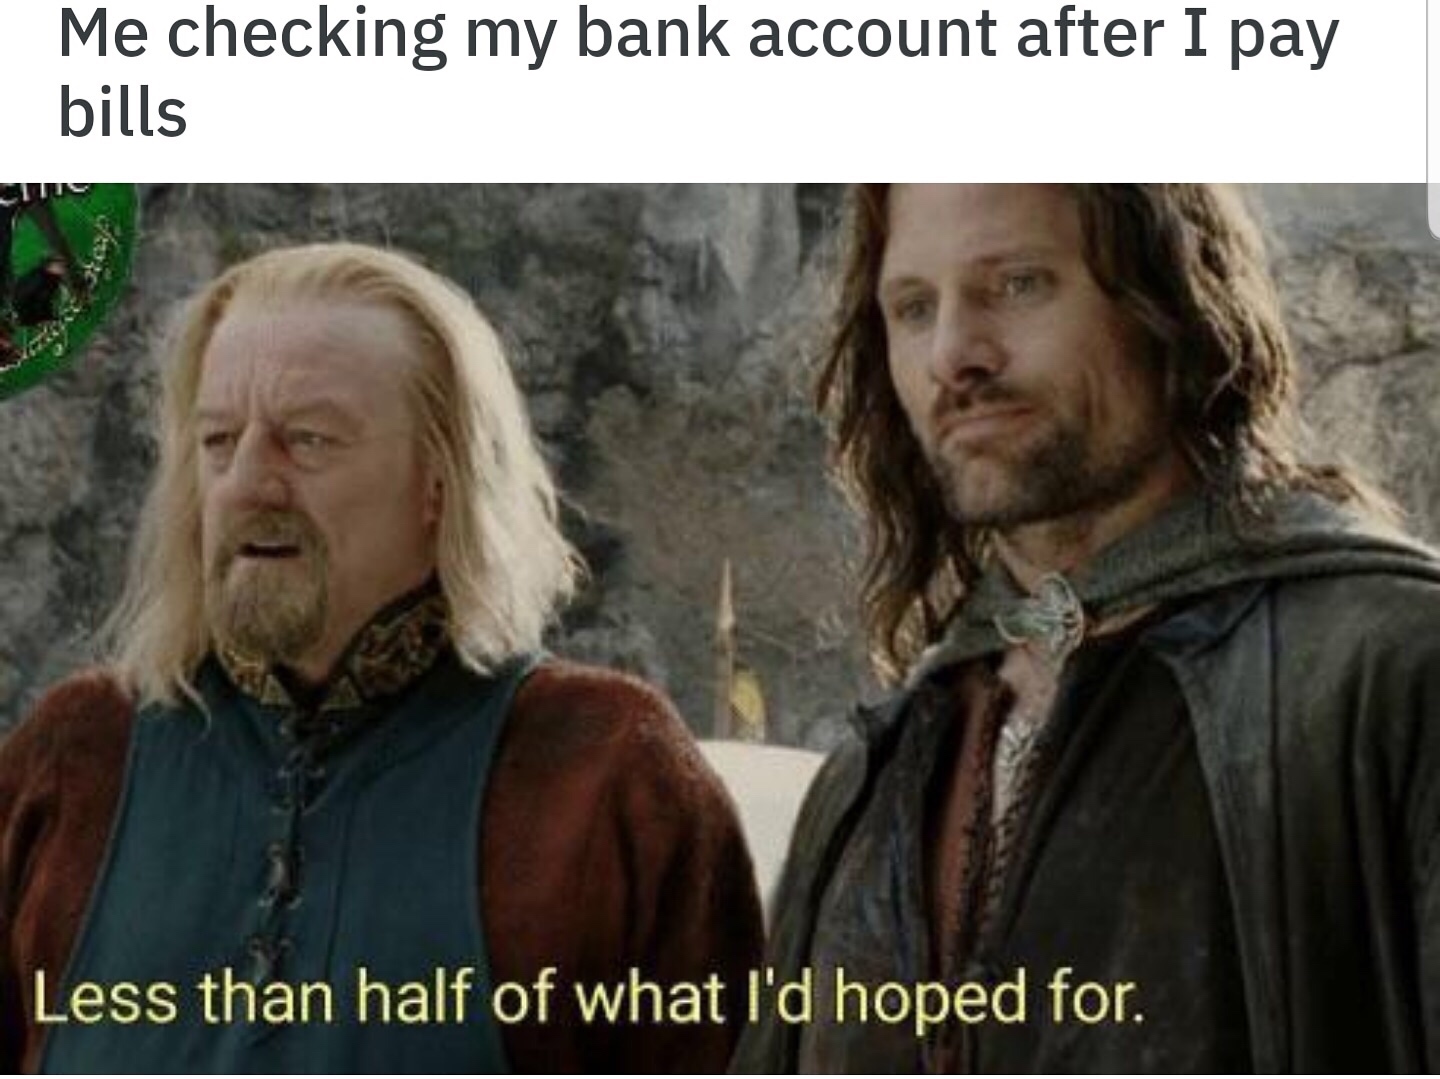 lotr memes - Me checking my bank account after I pay bills Less than half of what I'd hoped for.